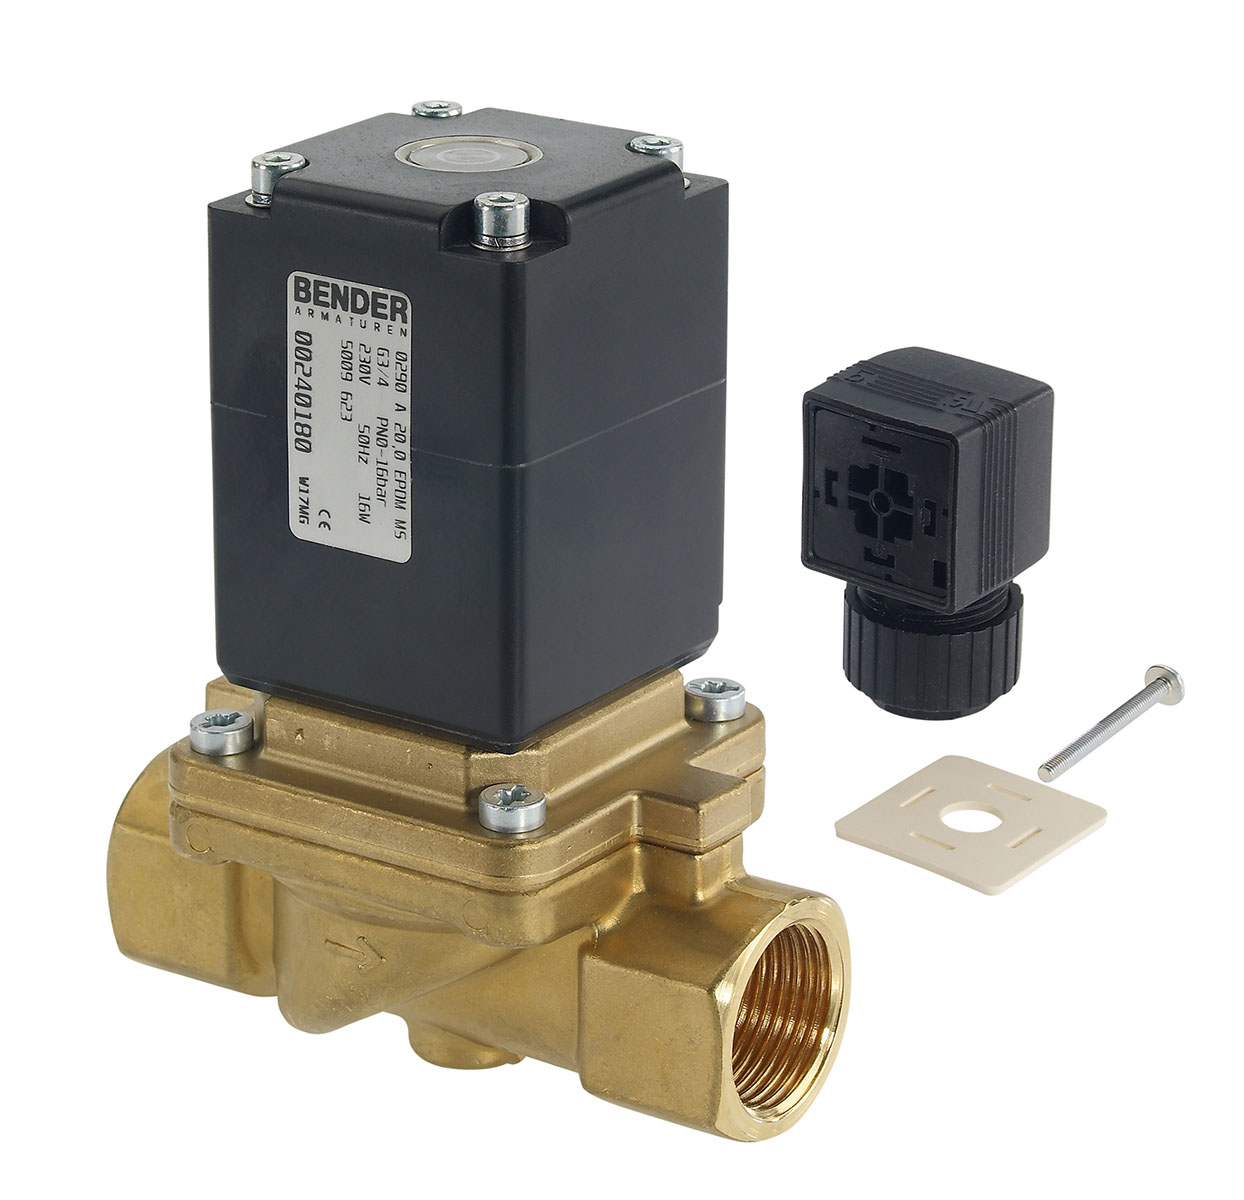 5009631 - 2/2 way solenoid valve normally closed for not flammable gas and fluids Type 6; female thread